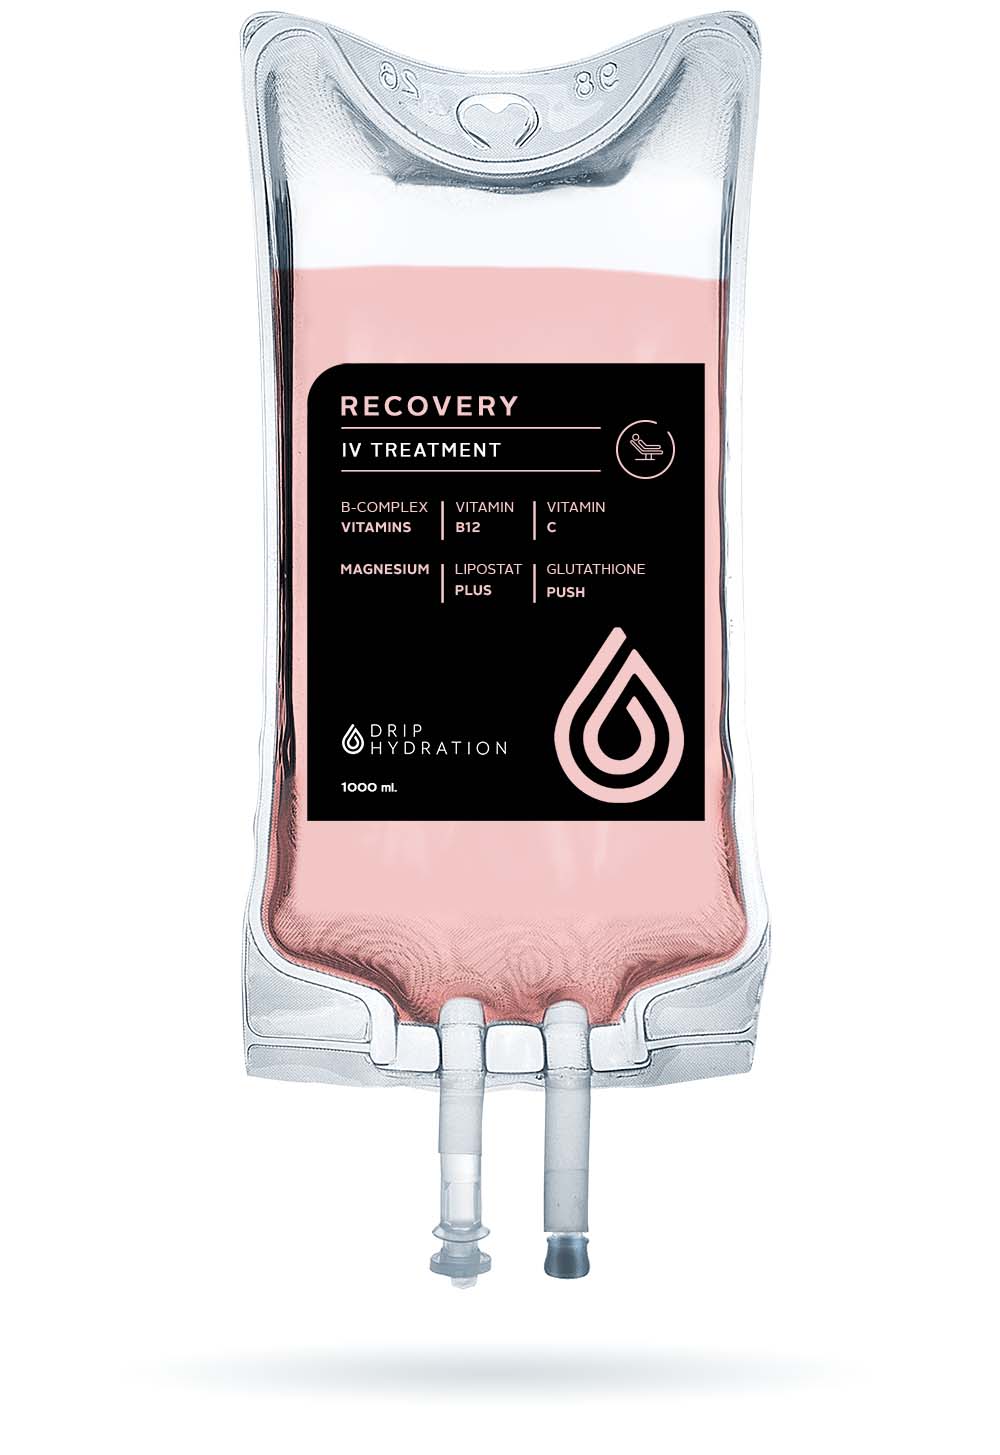 infusion bag named Recovery iv linking toward the service page